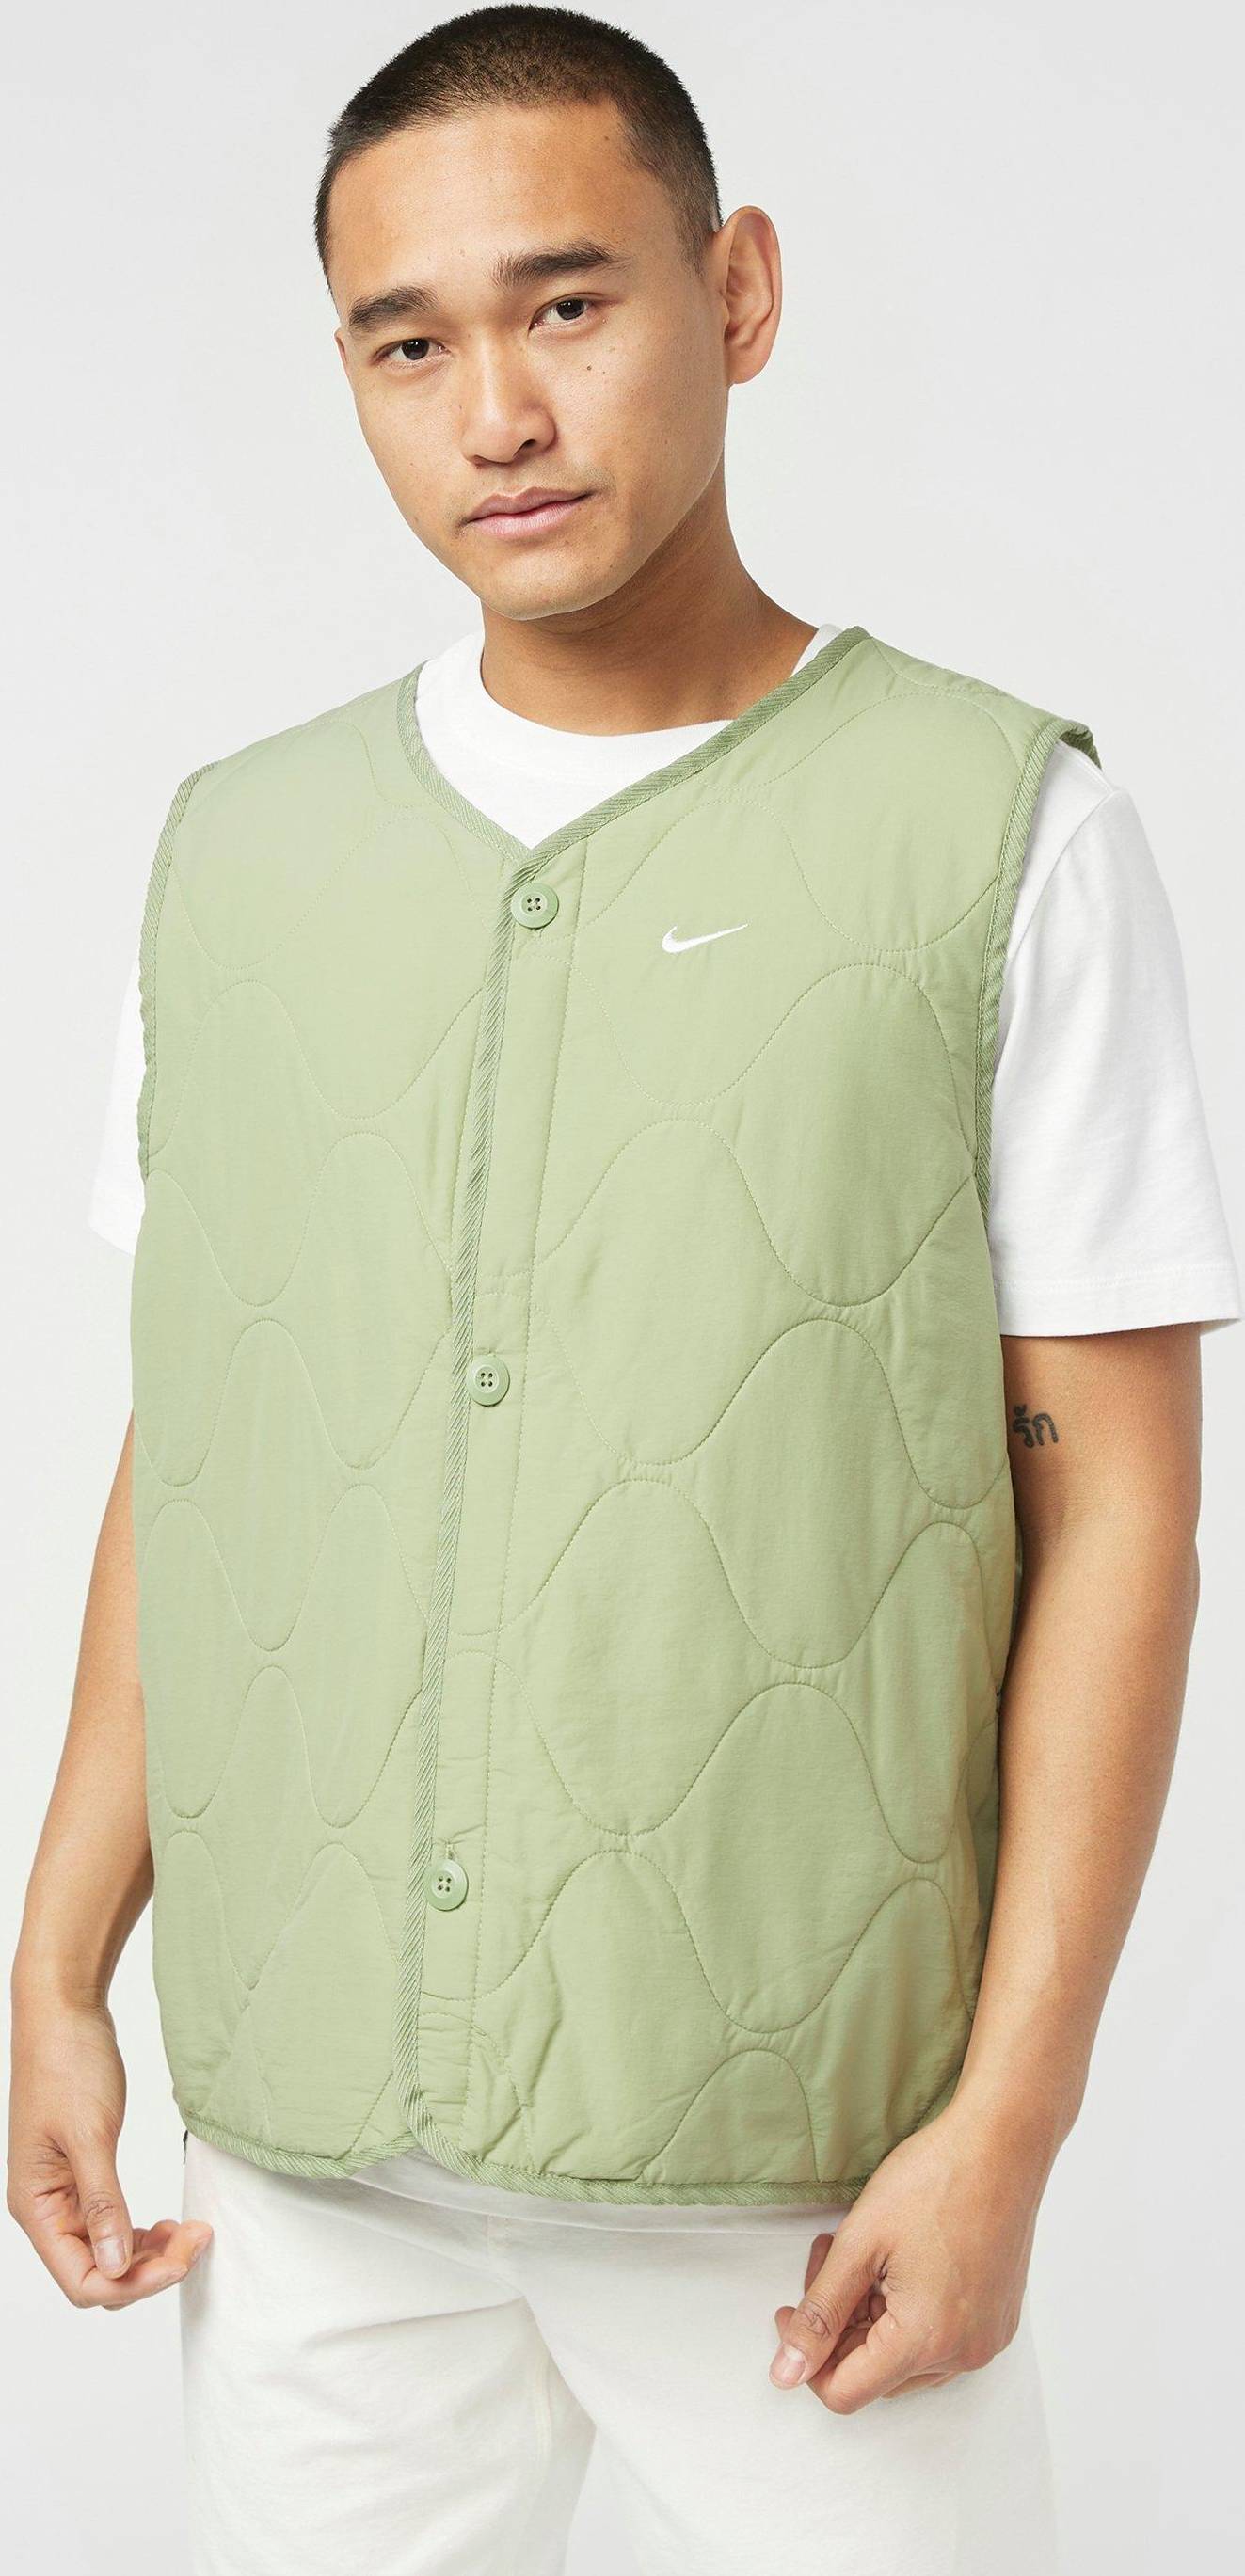 Mens nike gilet Nike Woven Insulted Military Vest